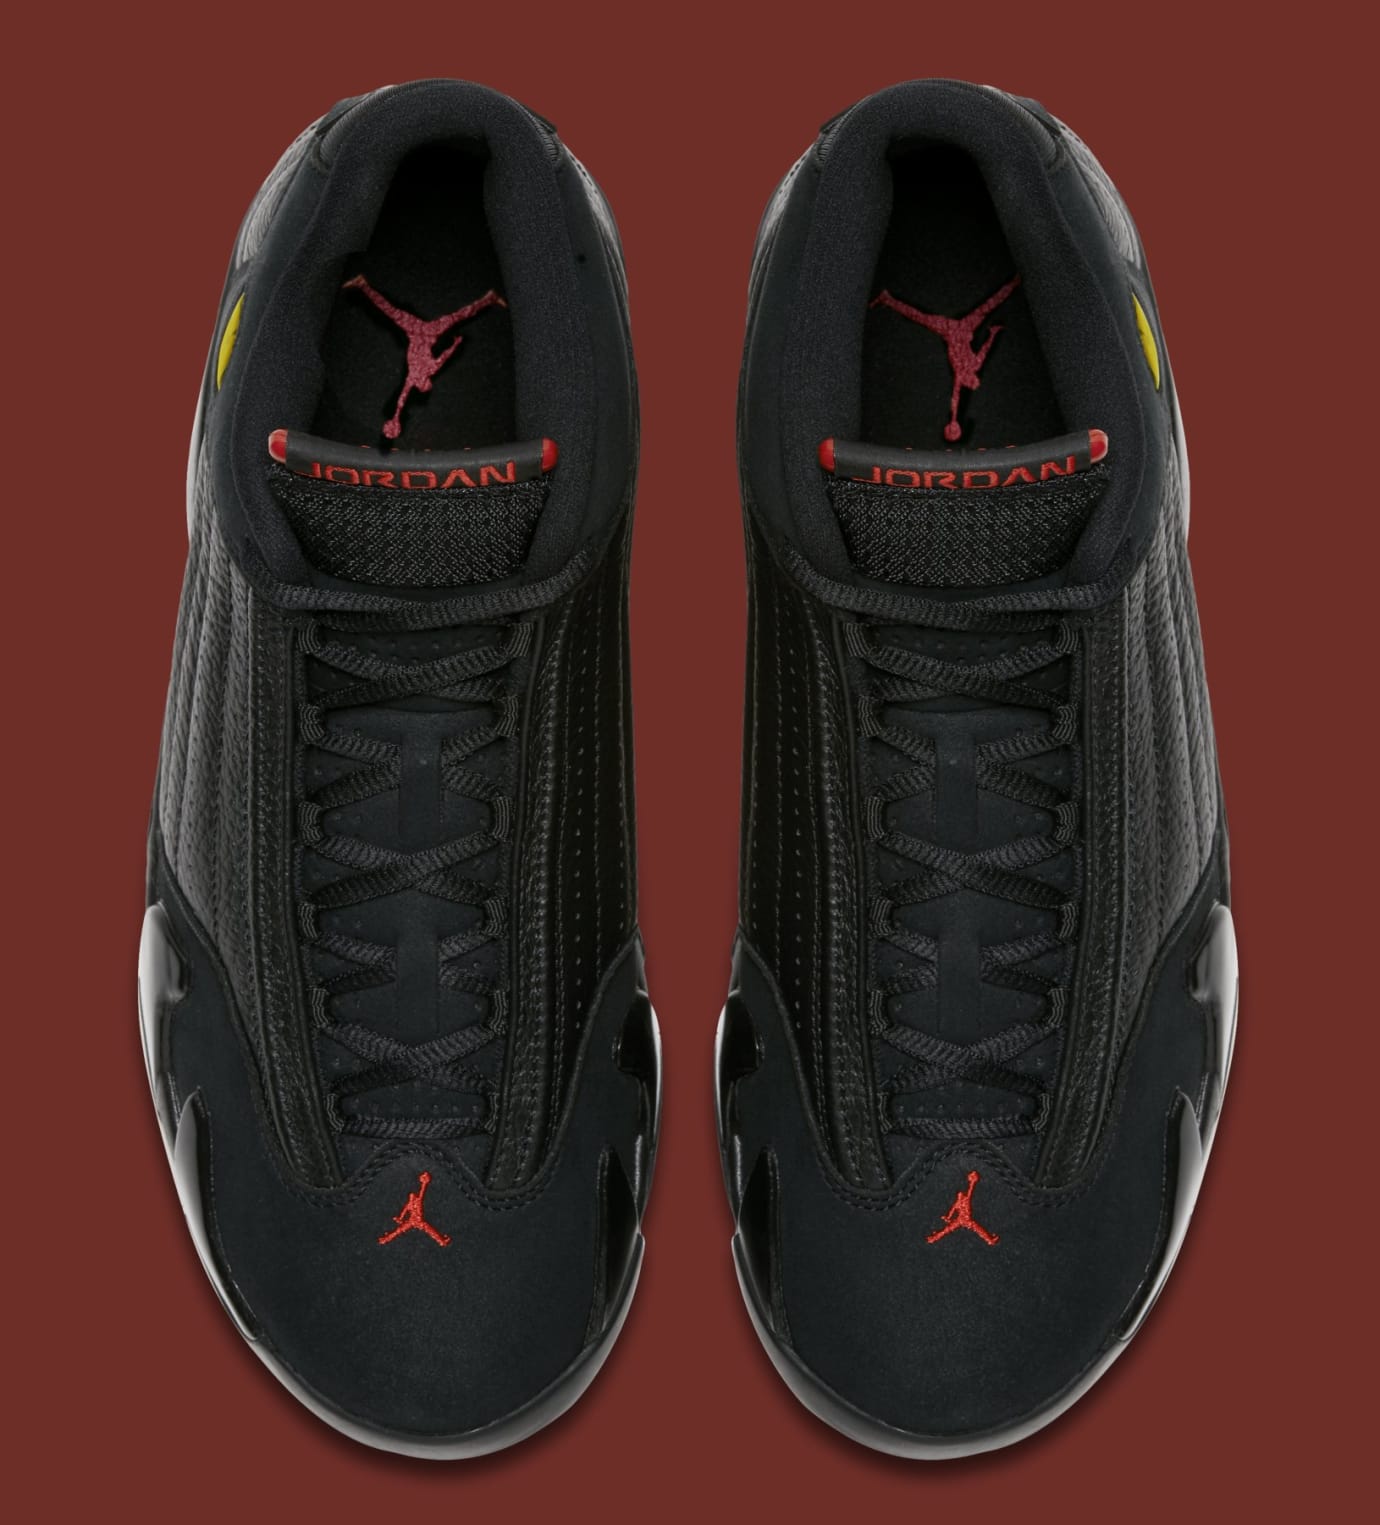 14s coming out